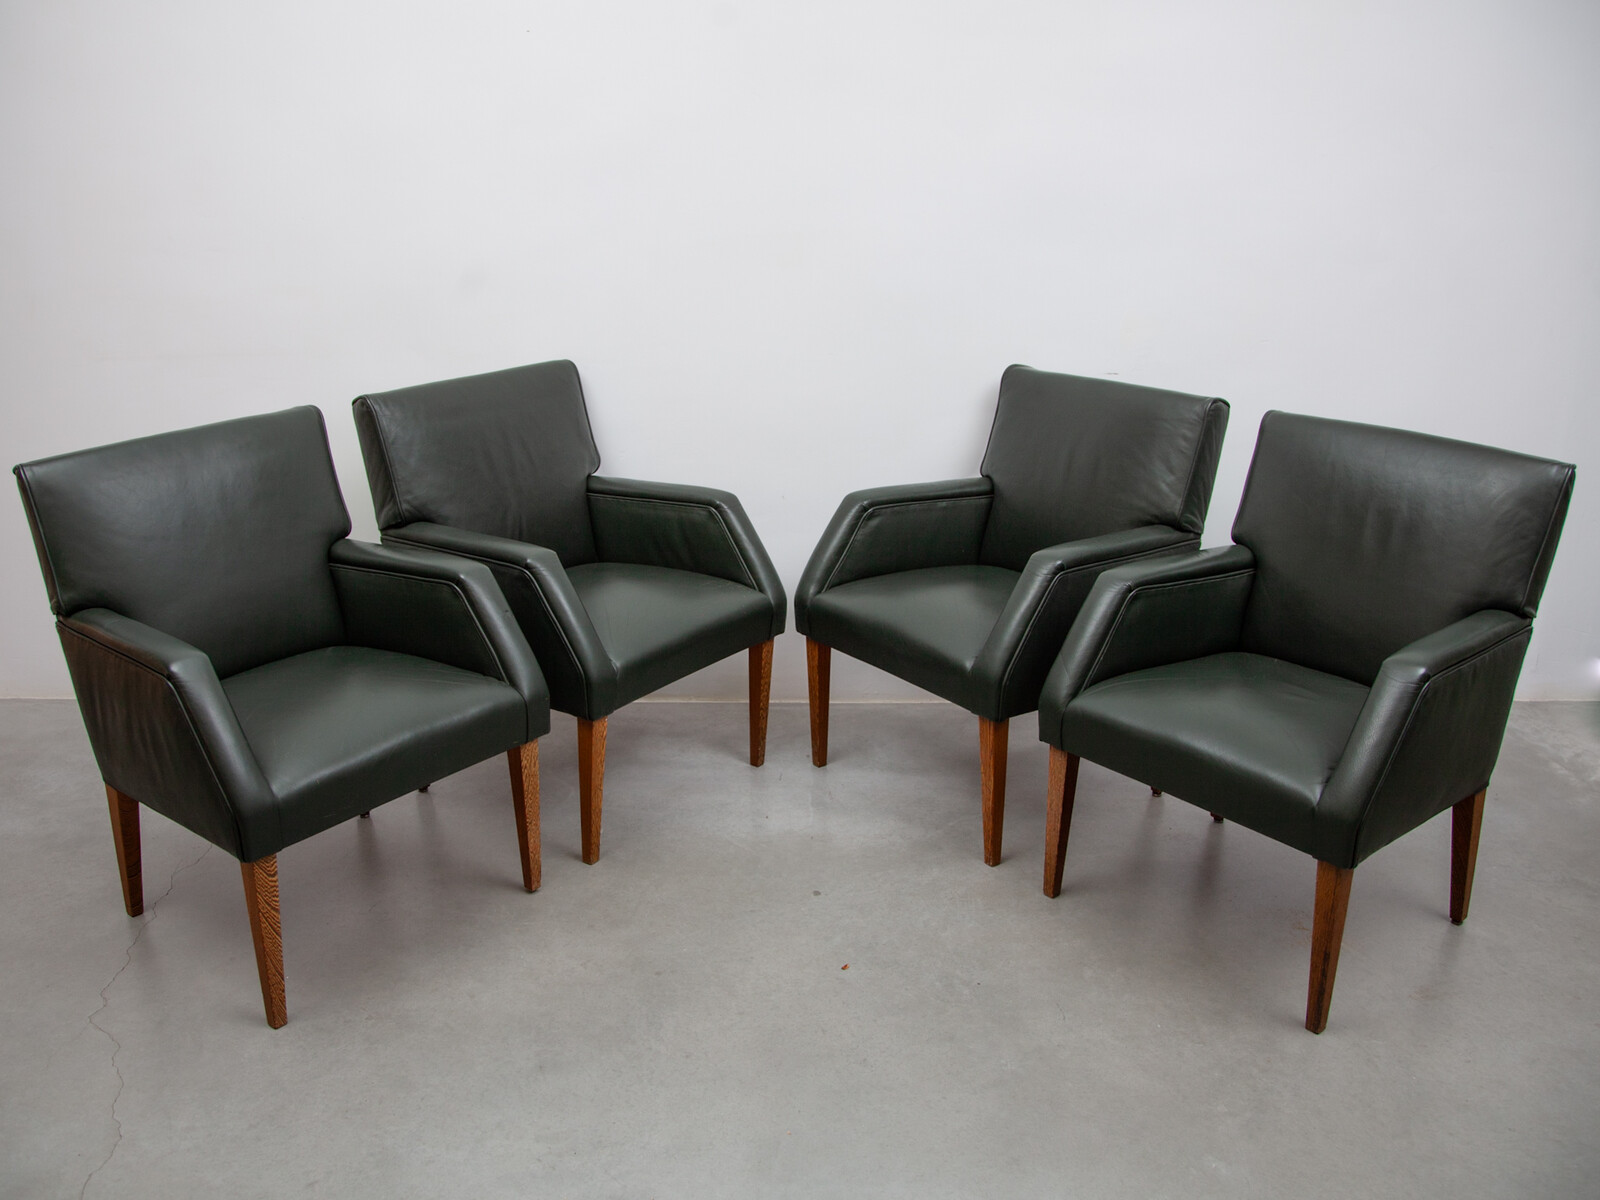 set of Four lounge Chairs made in Denmark, Wenge Olive green Leather